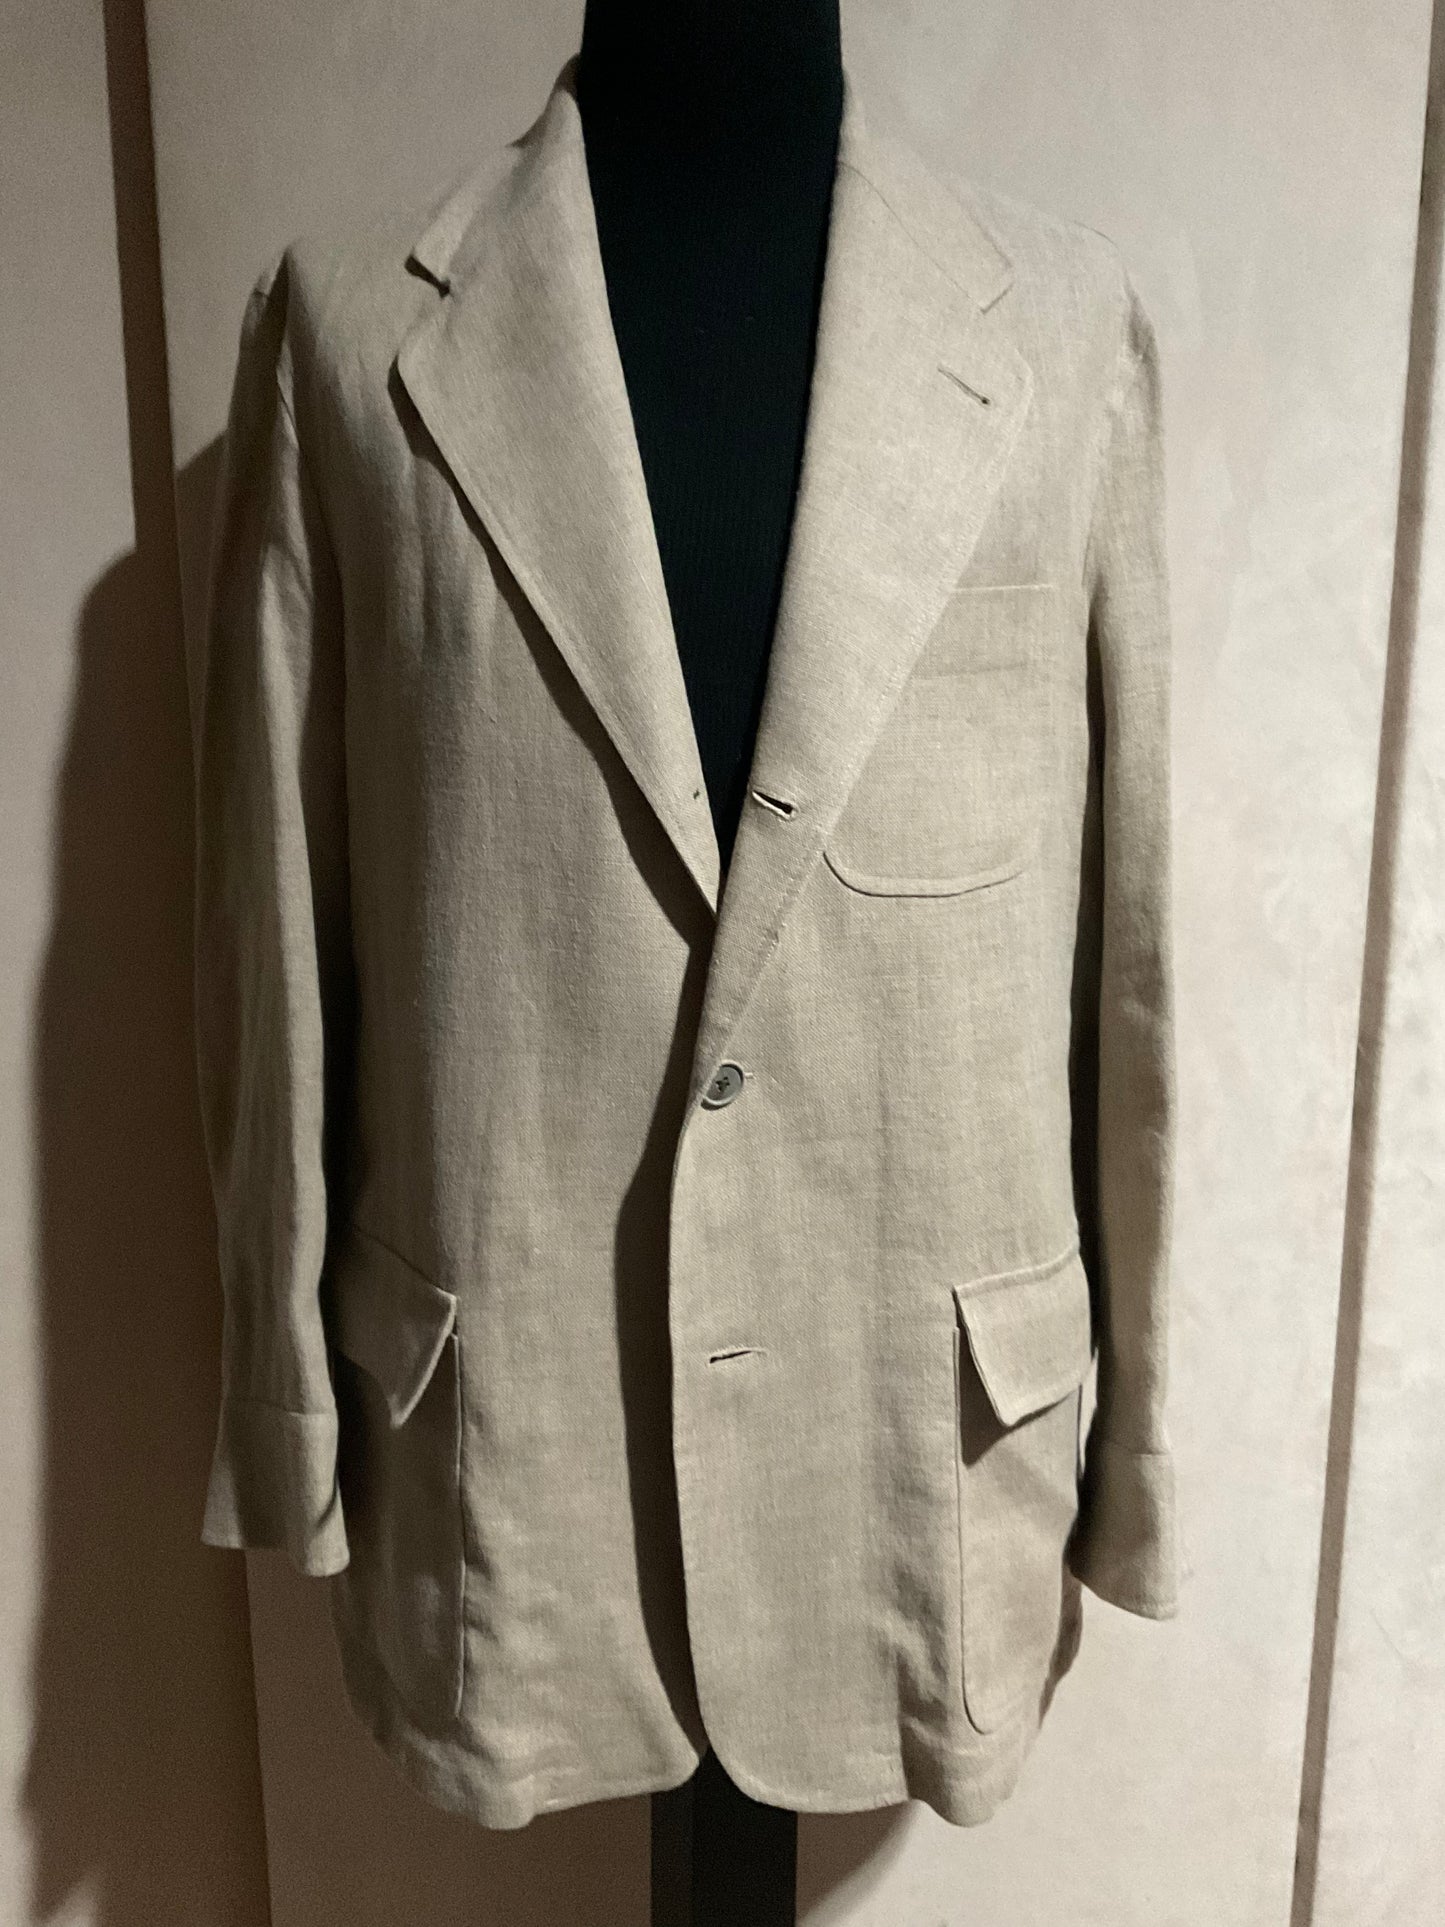 R P SPORTS JACKET / NATURAL LINEN / UNCONSTRUCTED / MEDIUM - LARGE / NEW / MADE IN USA